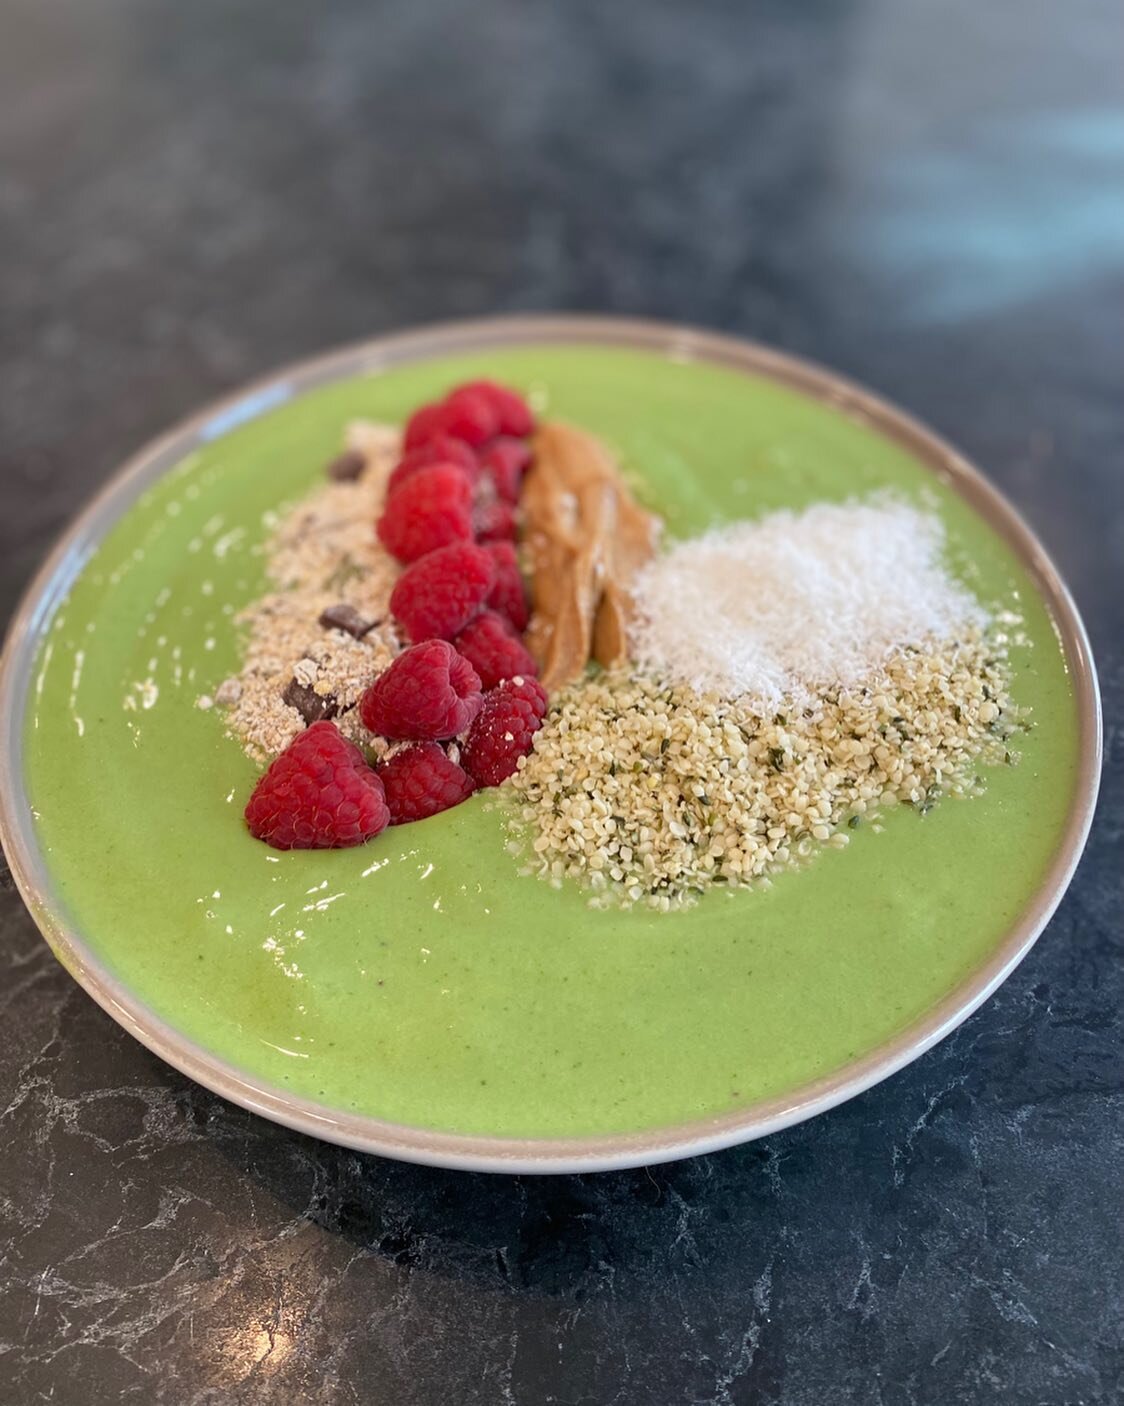 If it&rsquo;s thick enough to hold fruit then it&rsquo;s a smoothie bowl.
In blender : 3 frozen bananas, 1/2 cup mango, kale(to make it green), a heaping spoon of Greek yogurt a splash of milk of your choice and blend to the consistency of soft serve